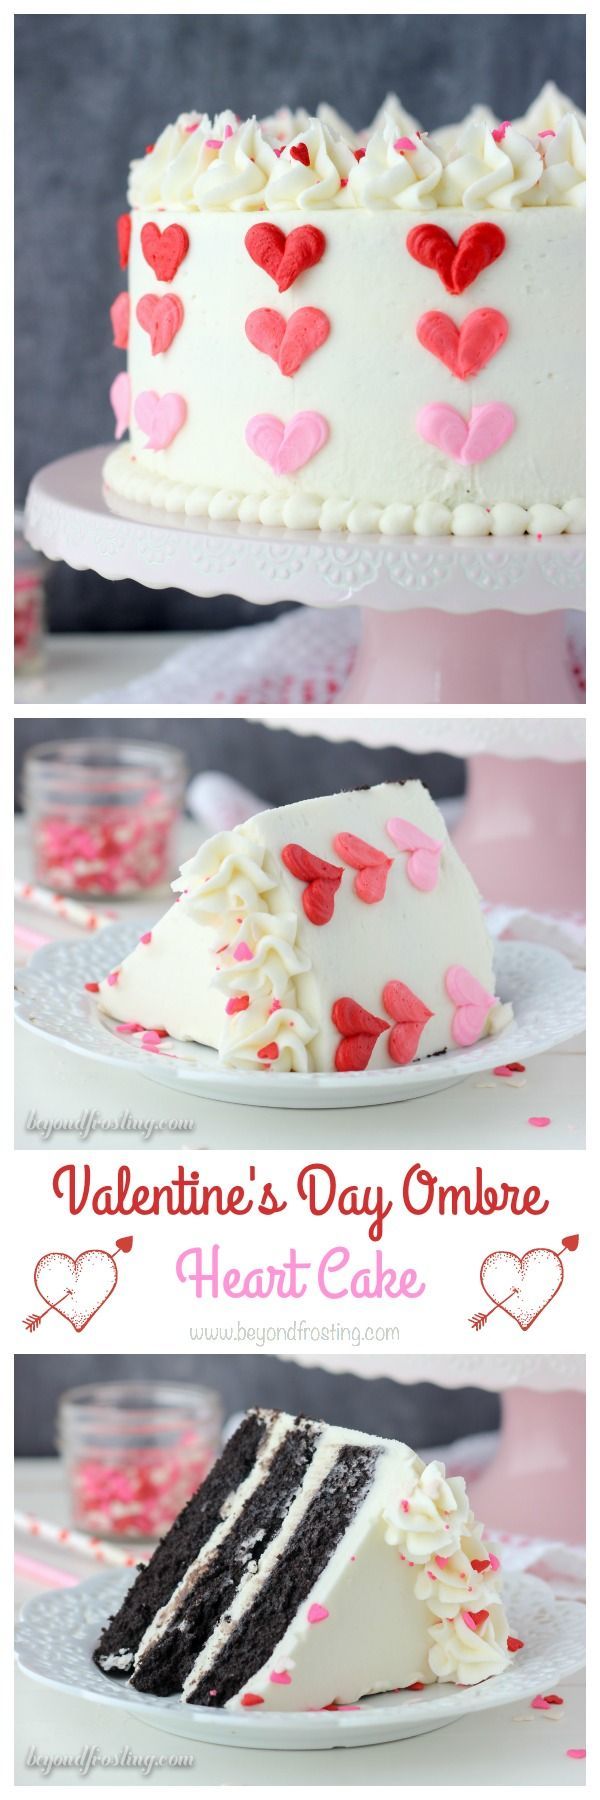 Follow these few easy tips to make this adorable Valentines Day Ombre Heart Cake.